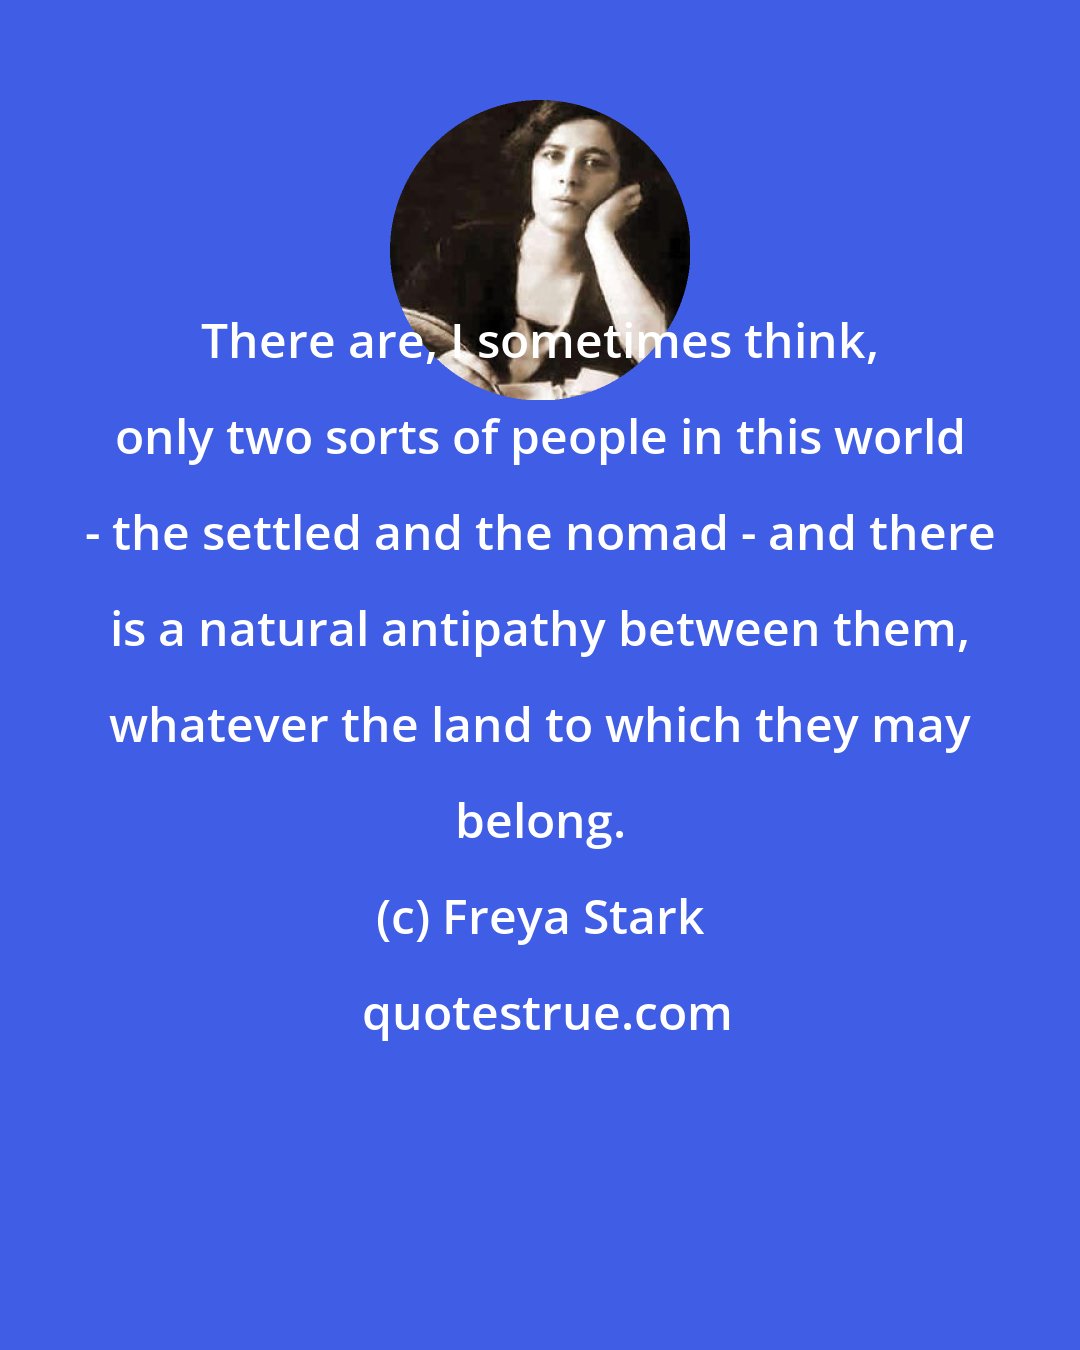 Freya Stark: There are, I sometimes think, only two sorts of people in this world - the settled and the nomad - and there is a natural antipathy between them, whatever the land to which they may belong.